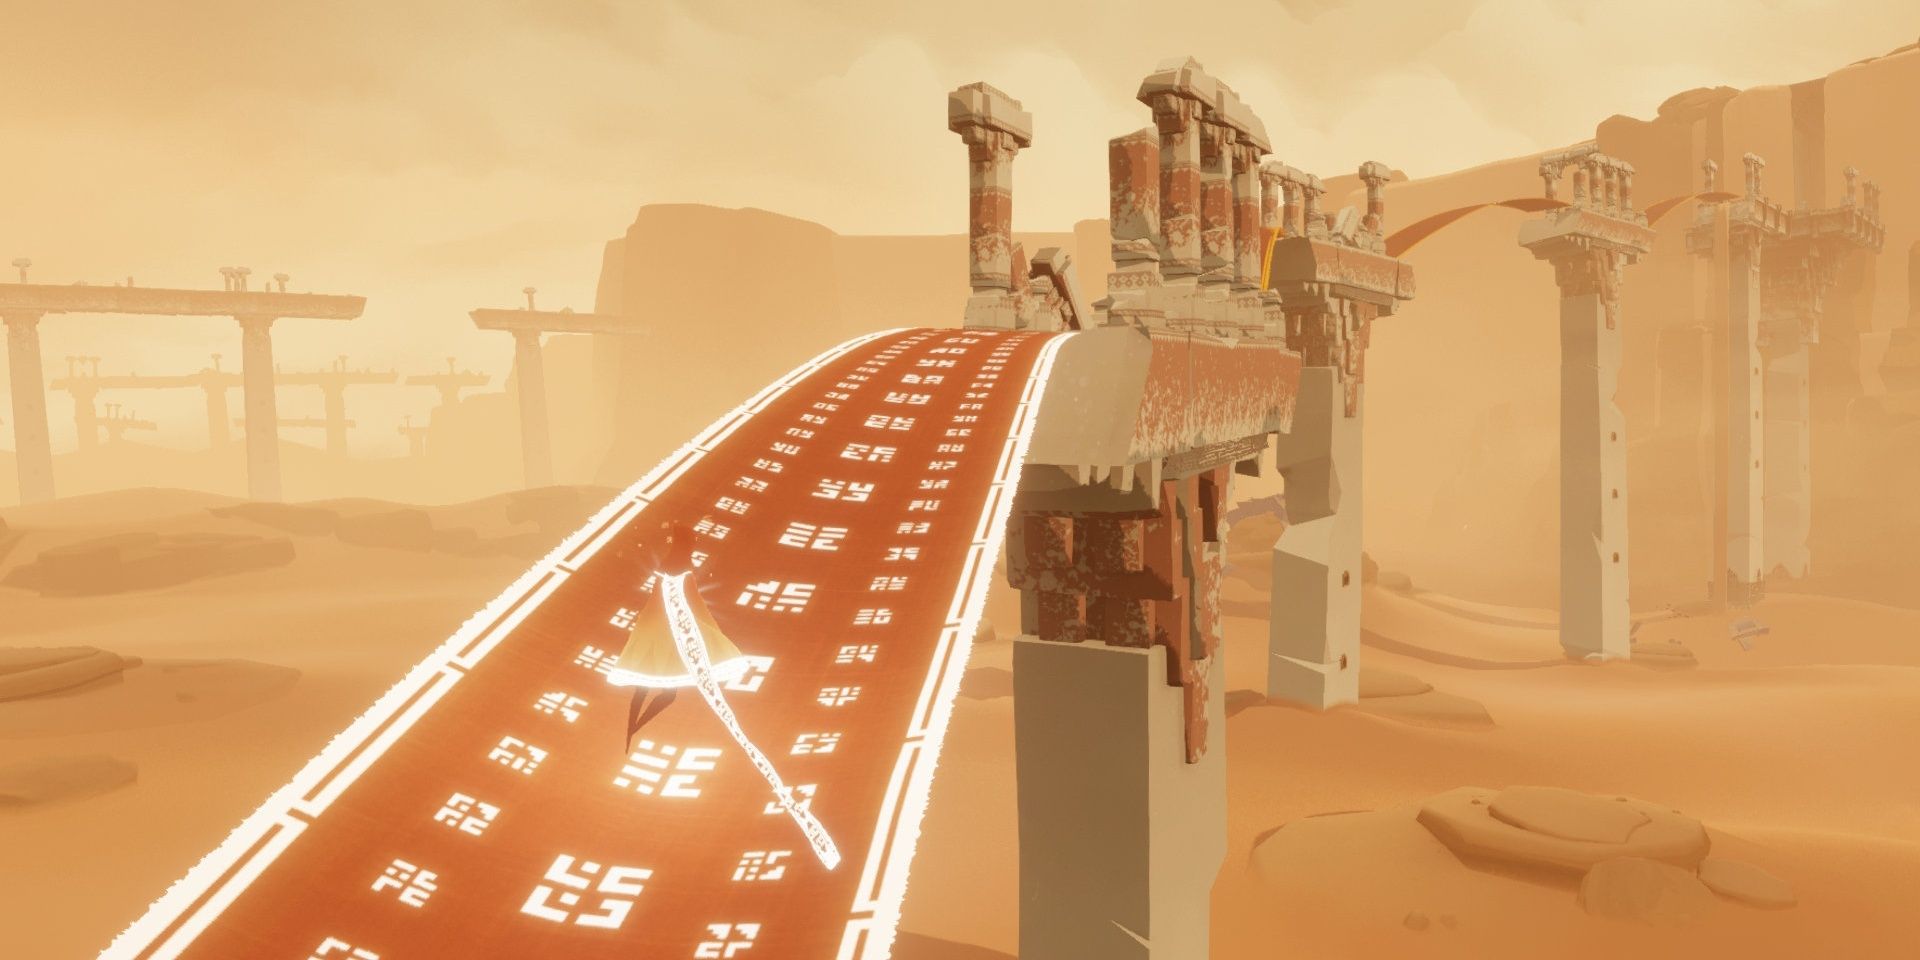 Gameplay from Journey by ThatGameCompany